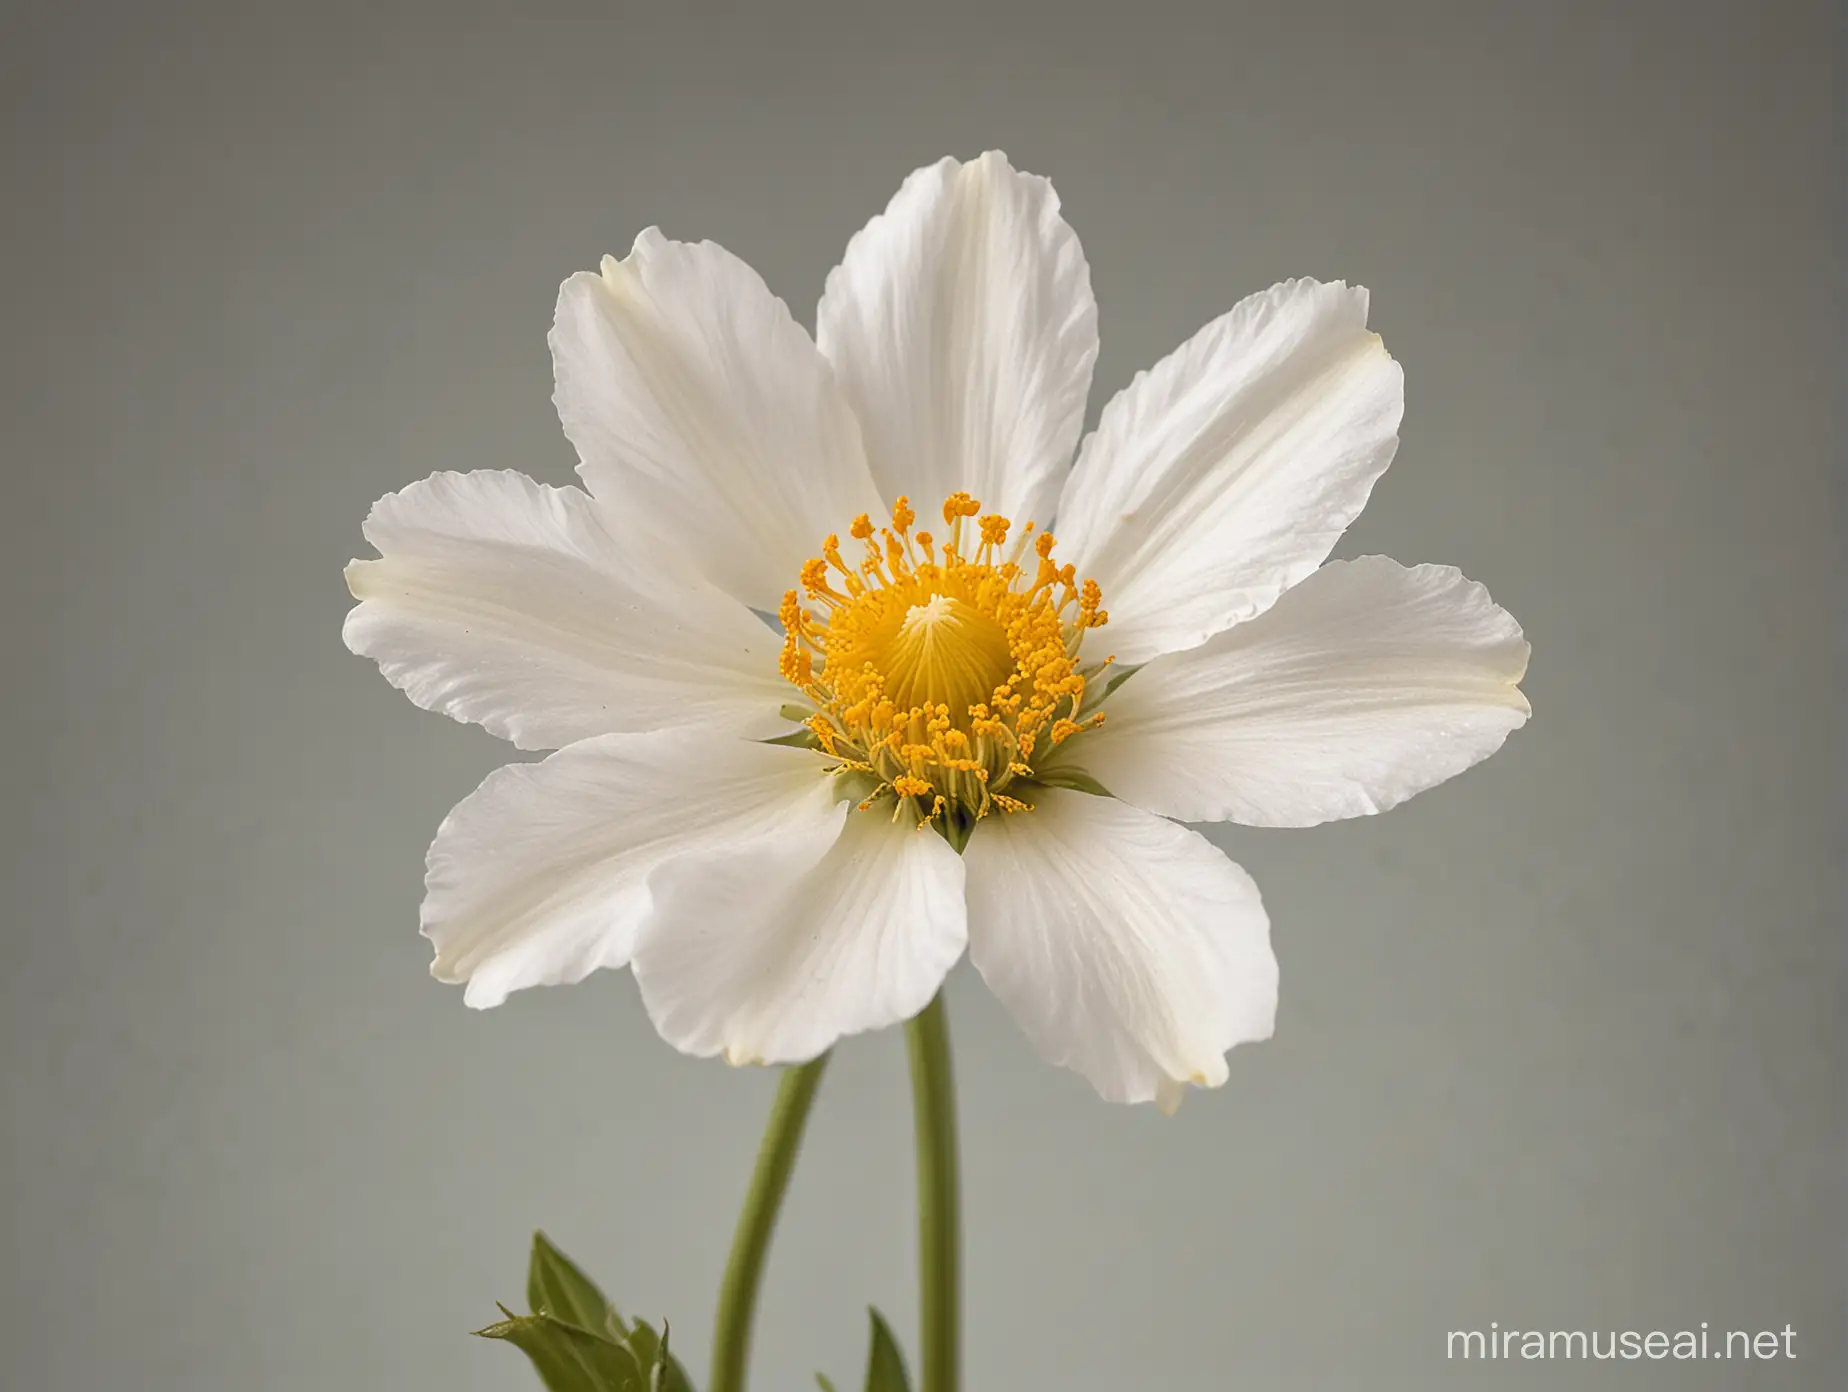 This image shows one delicate white flower with a yellow center, appearing to be in full bloom. The flower is set against an isolated background. The flower has multiple petals that are thin and slightly ruffled, giving it an elegant appearance. The stem of the flower is thin and brown, with some buds that have yet to bloom. high-quality image on isolated background.